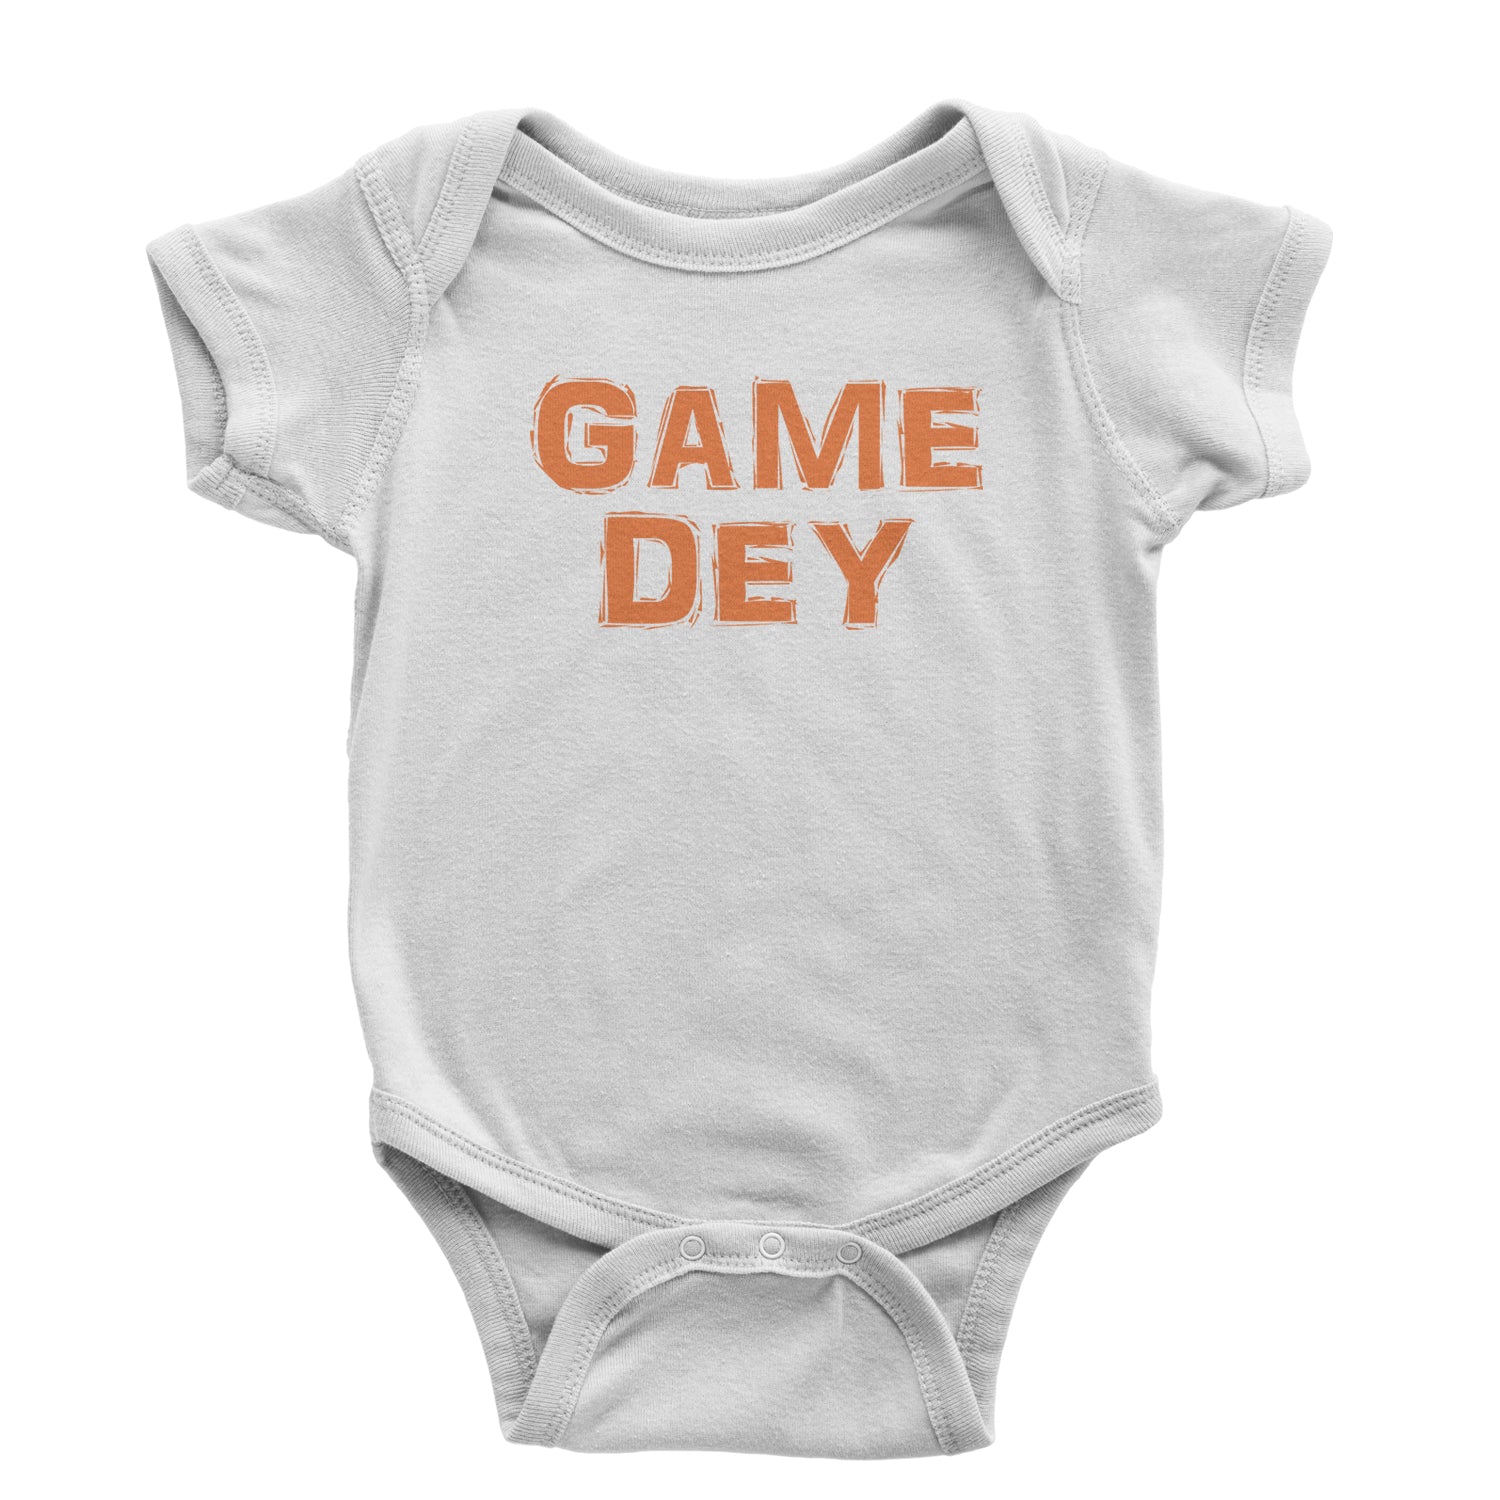 Game Dey Cincinnati Football Infant One-Piece Romper Bodysuit and Toddler T-shirt ball, burrow, cincinati, cleveland, foot, football, joe, nati, ohio, who by Expression Tees